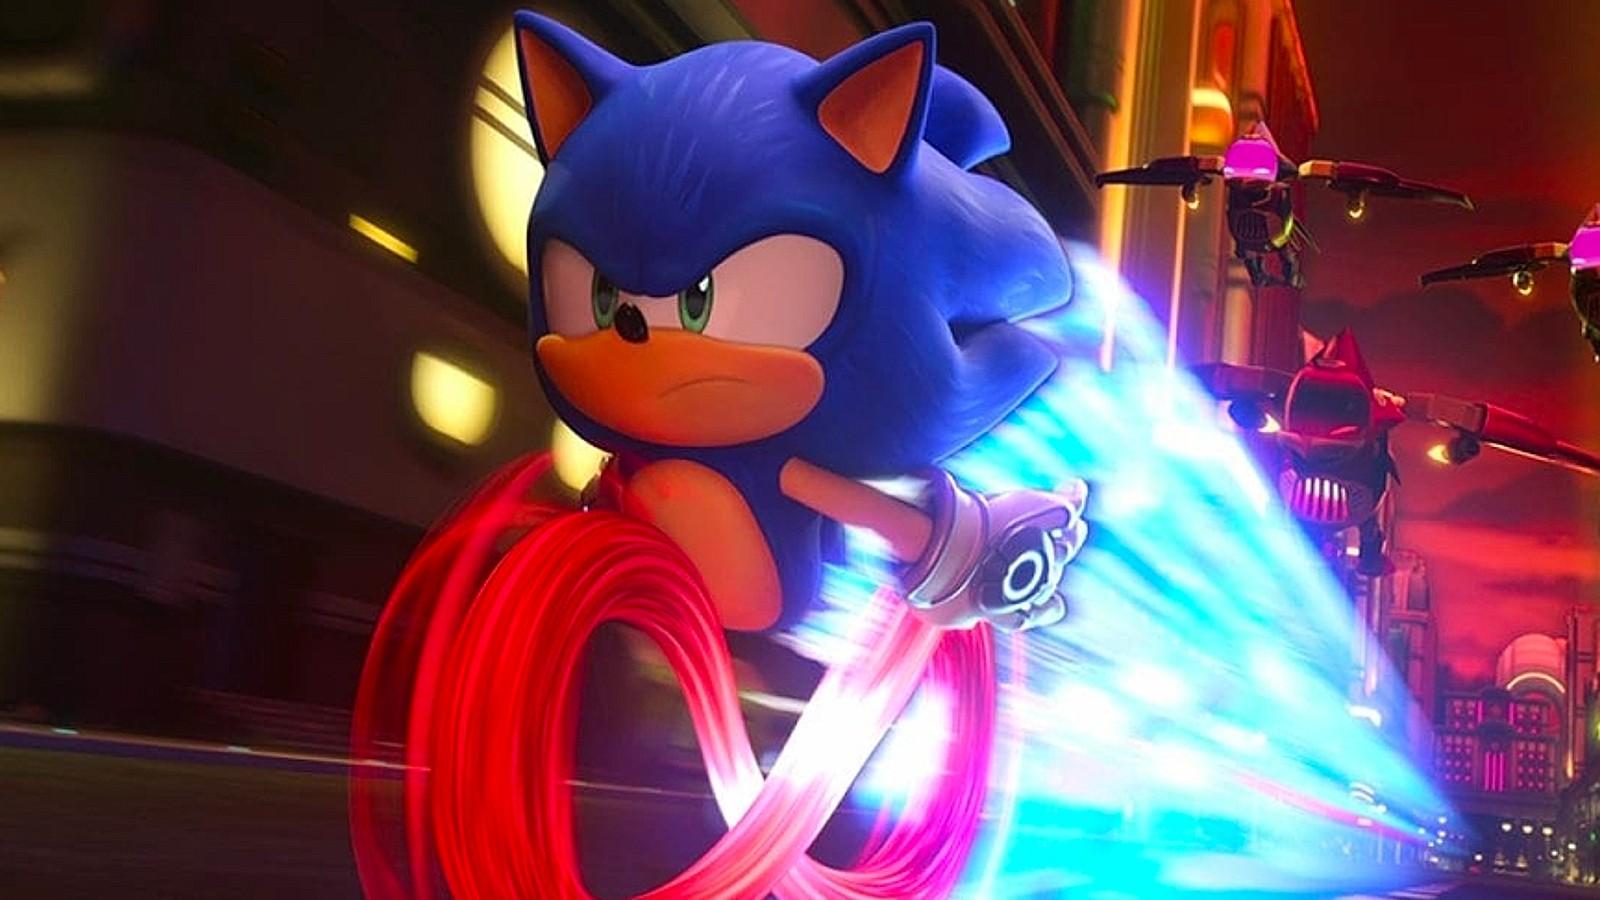 Sonic Prime Season 3 Release Date Rumors: When Is It Coming Out?